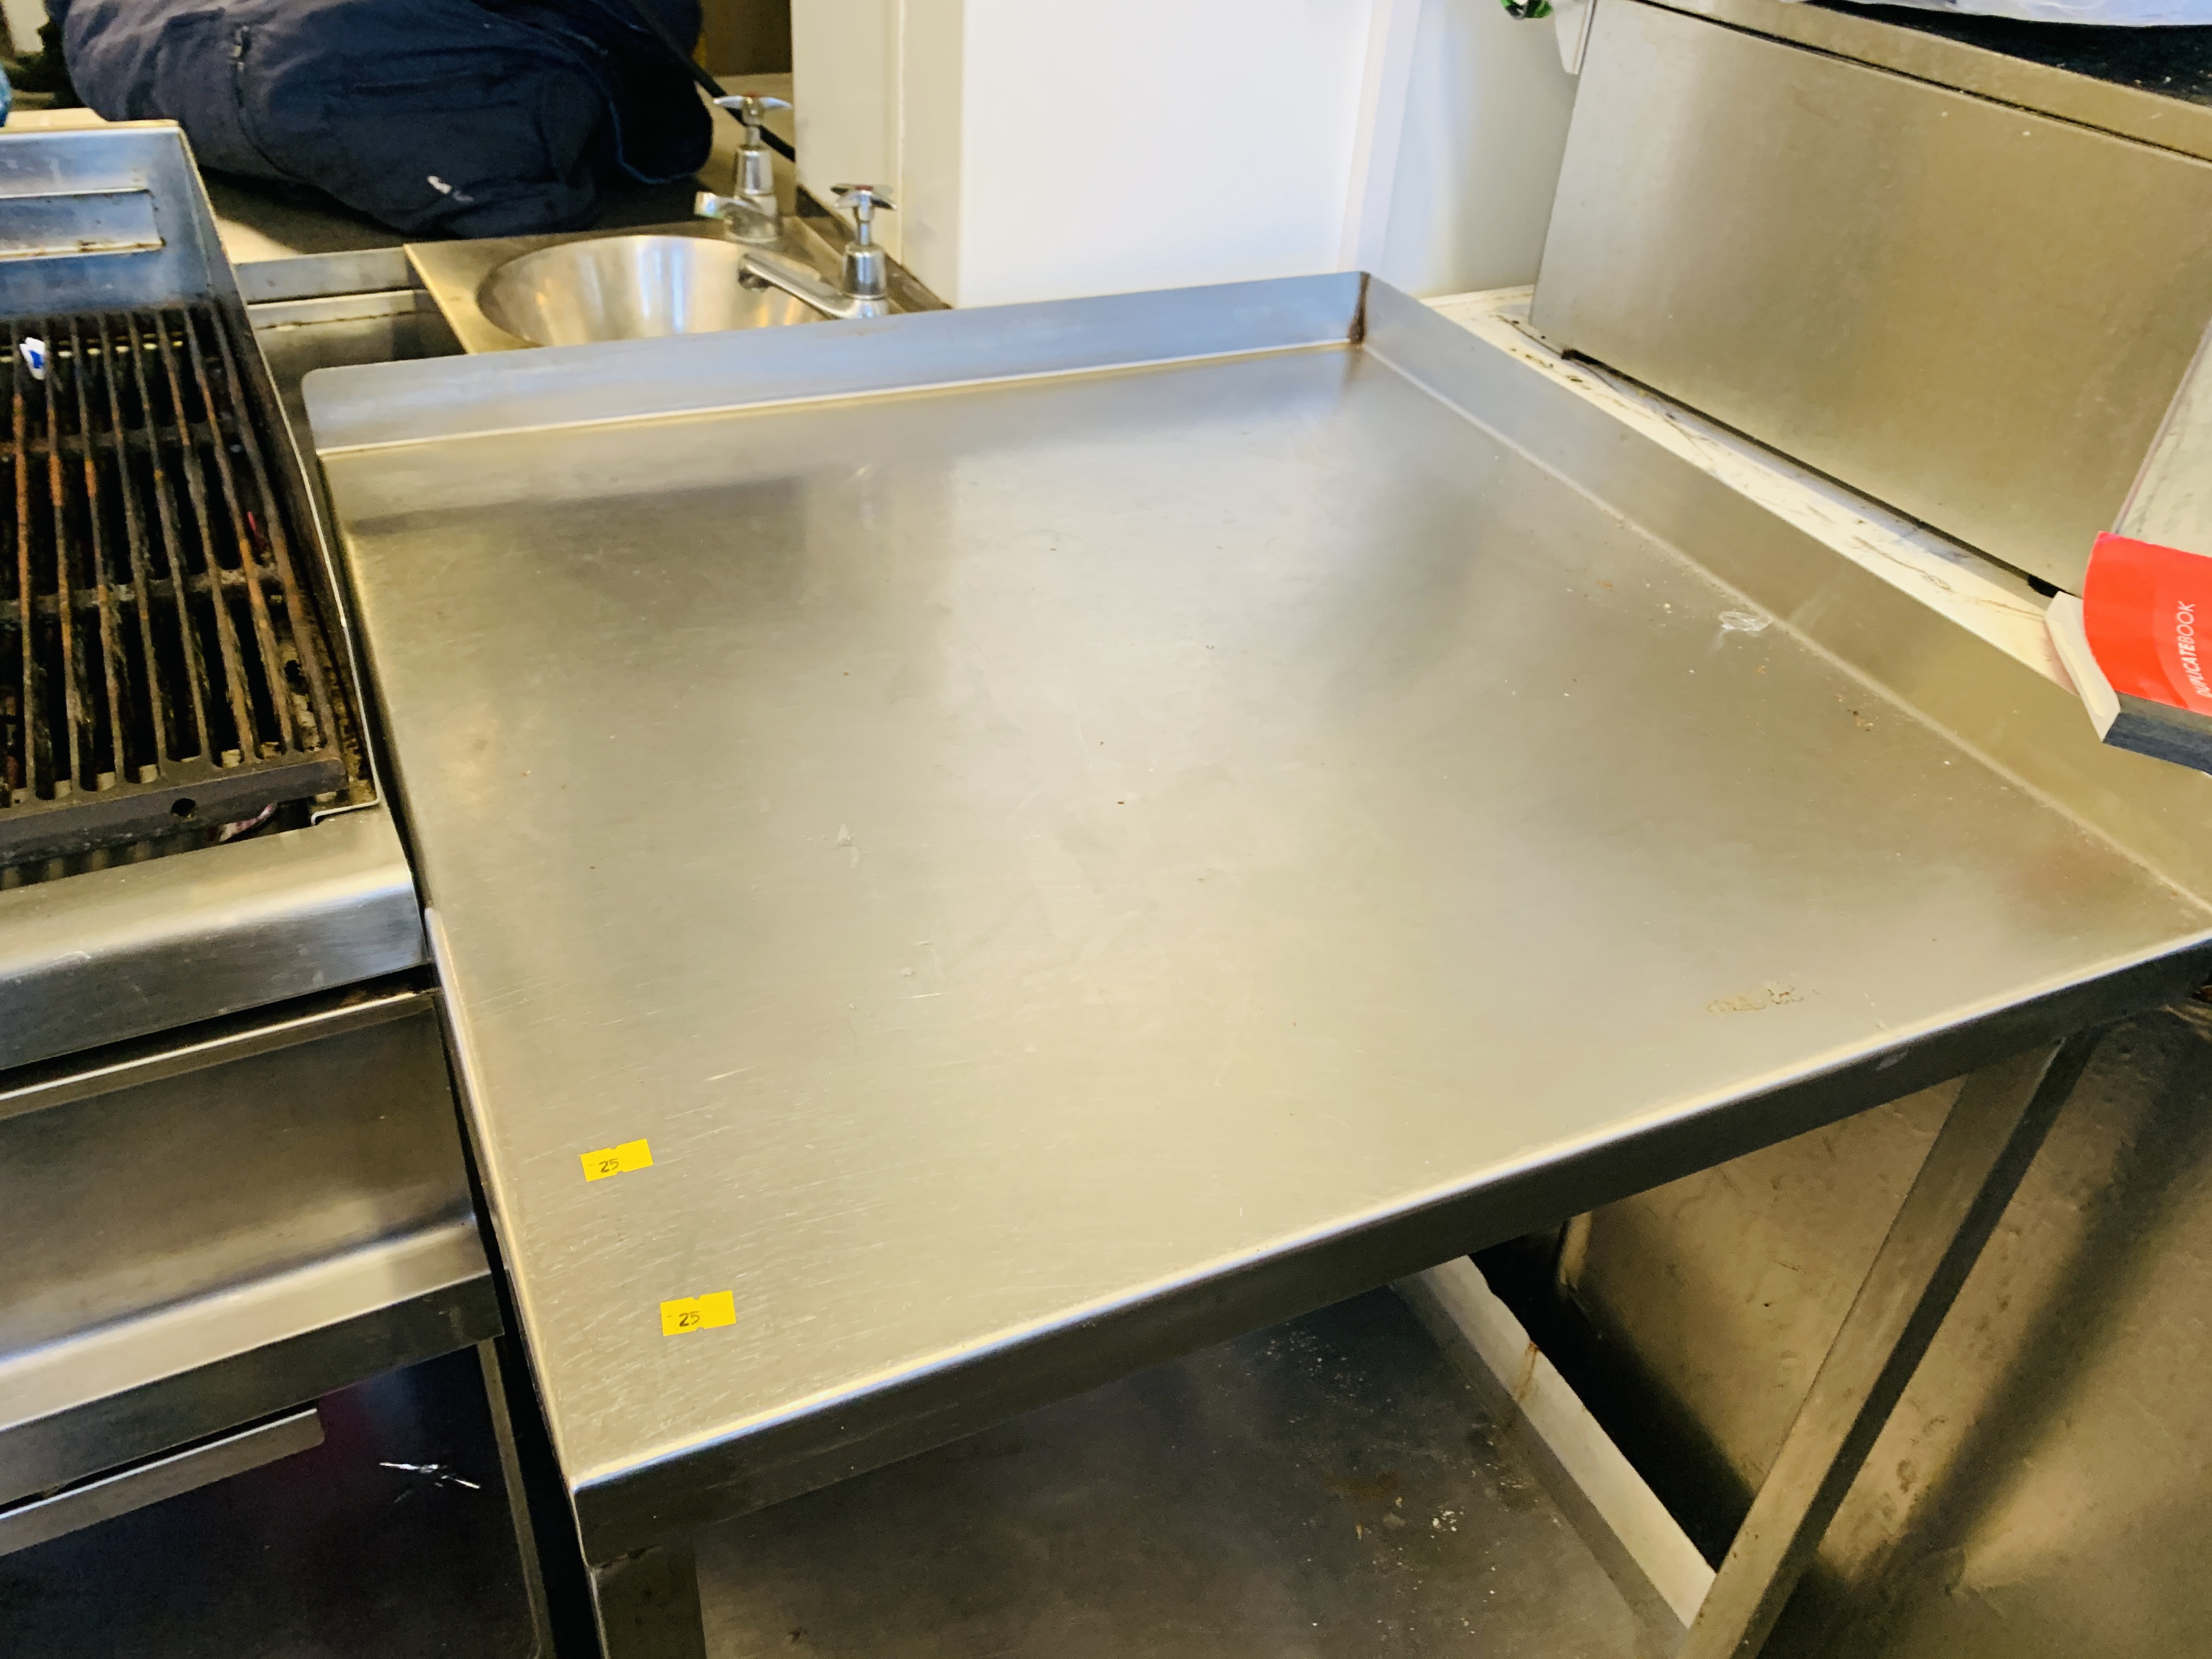 2 X STAINLESS STEEL TWO TIER CORNER CATERING PREPARATION TABLE - W 70CM. D 70CM. - Image 5 of 6